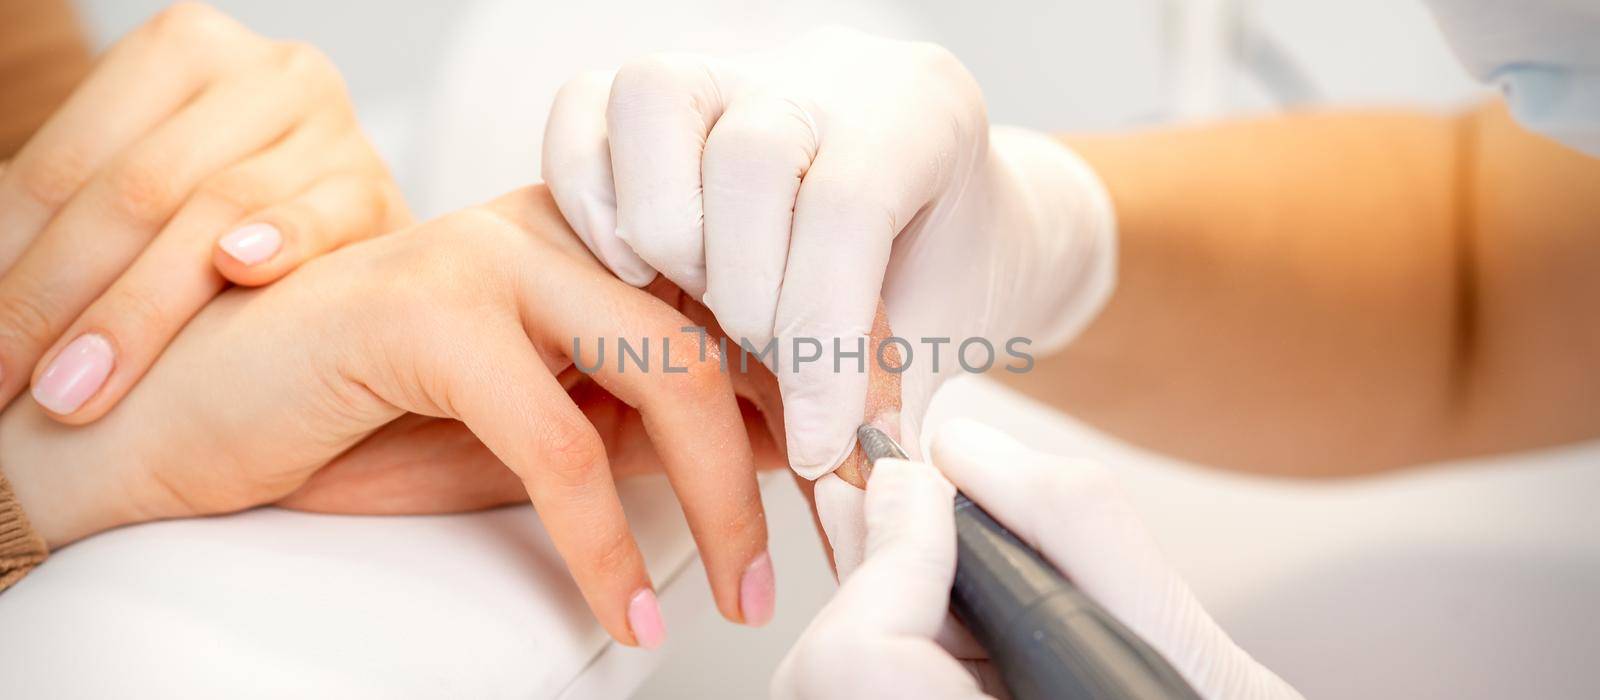 Manicure master applying electric nail file machine removing old nail polish on fingernails in a nail salon